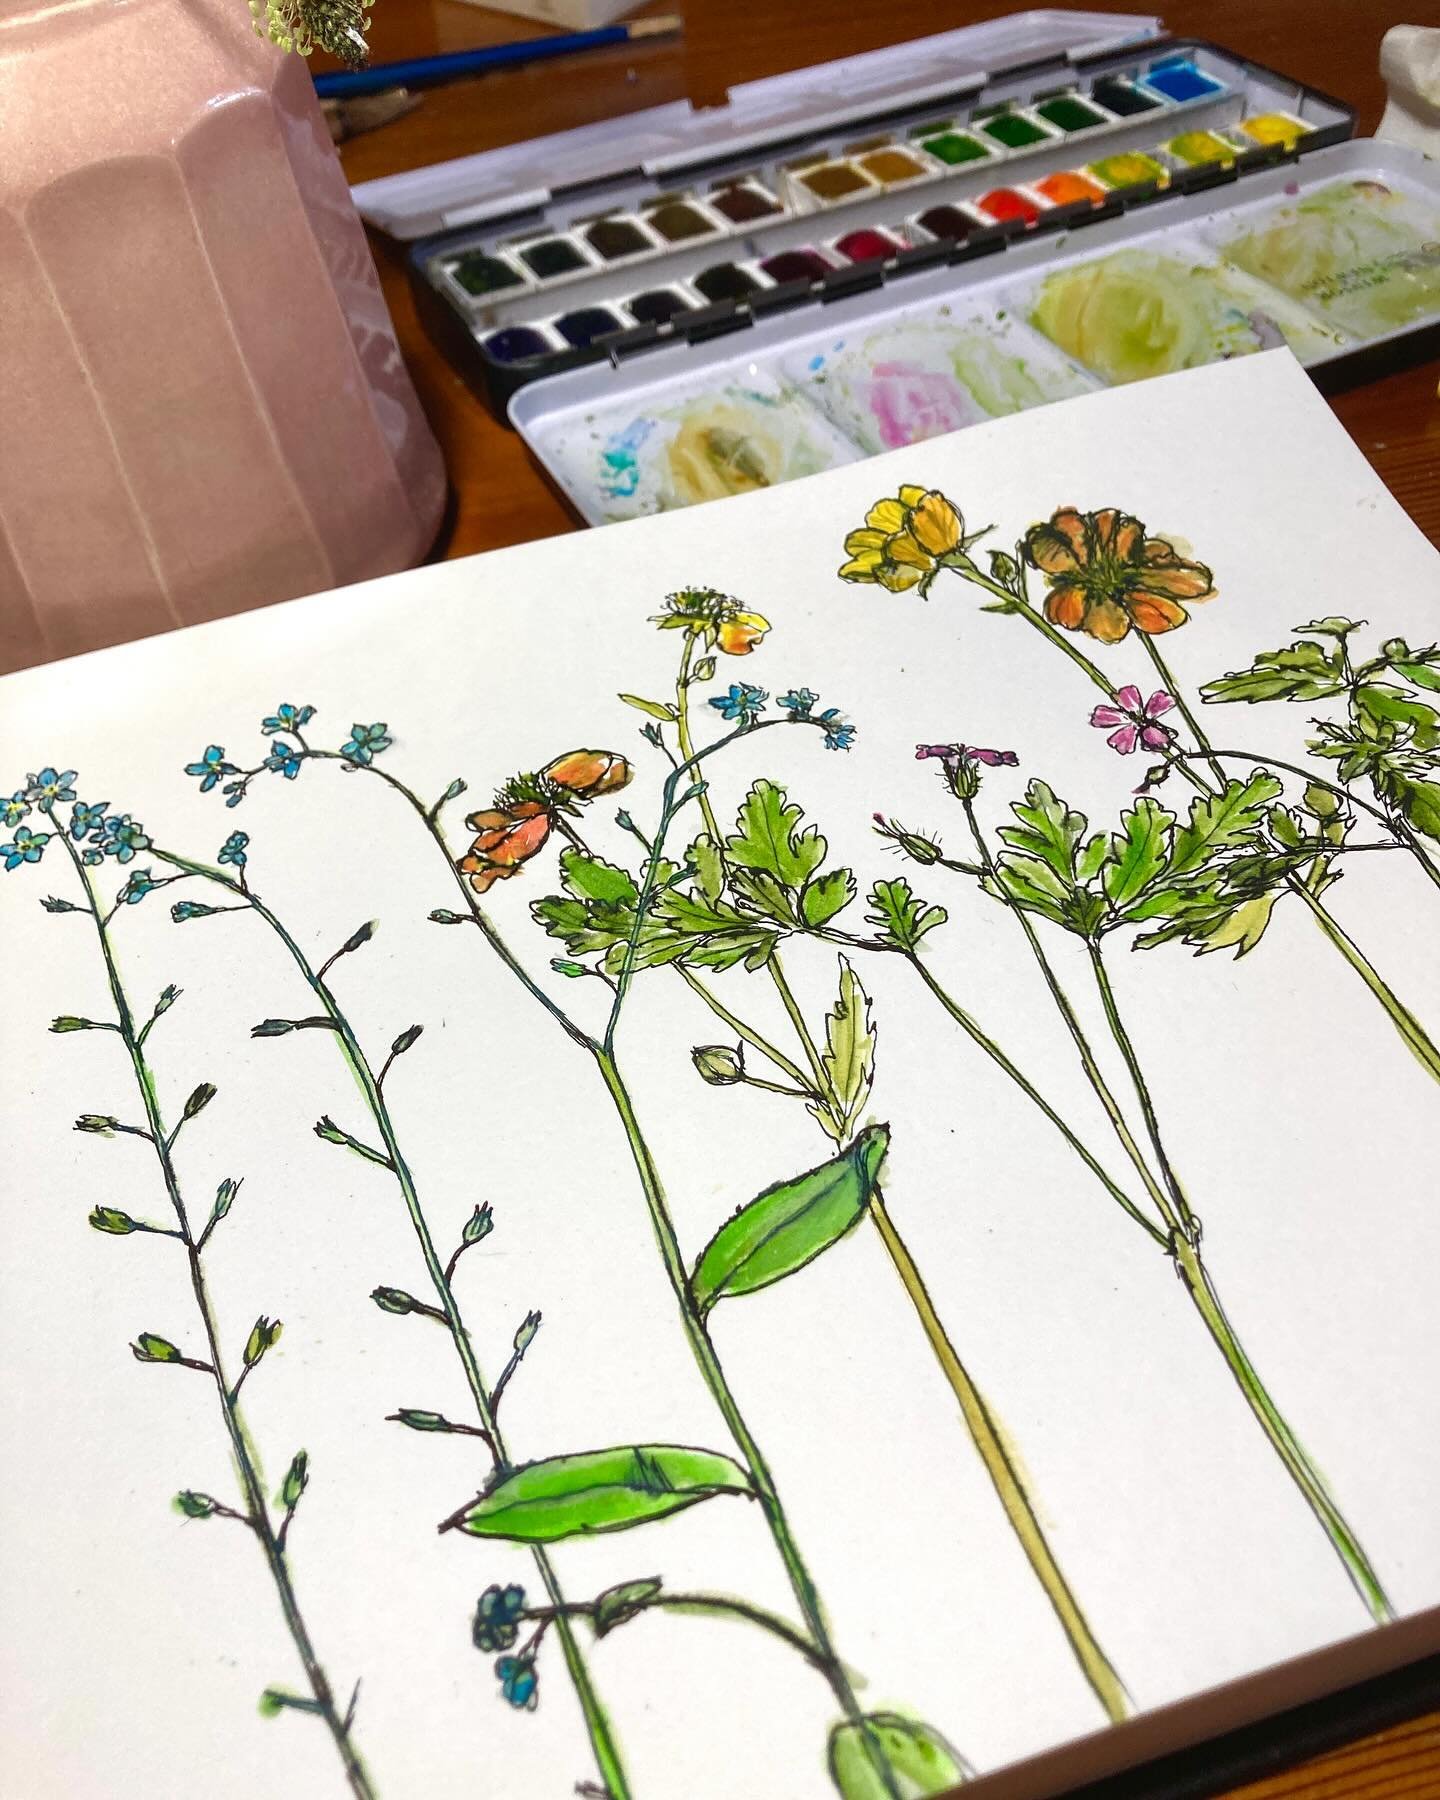 More drawing &hellip;. today it&rsquo;s been a combination of Herb Robert (Geranium robertianum), forget-me-knots and Geum (totally tangerine). Herb Robert is another flier that has always been in our garden and pops up all over the place. I love its